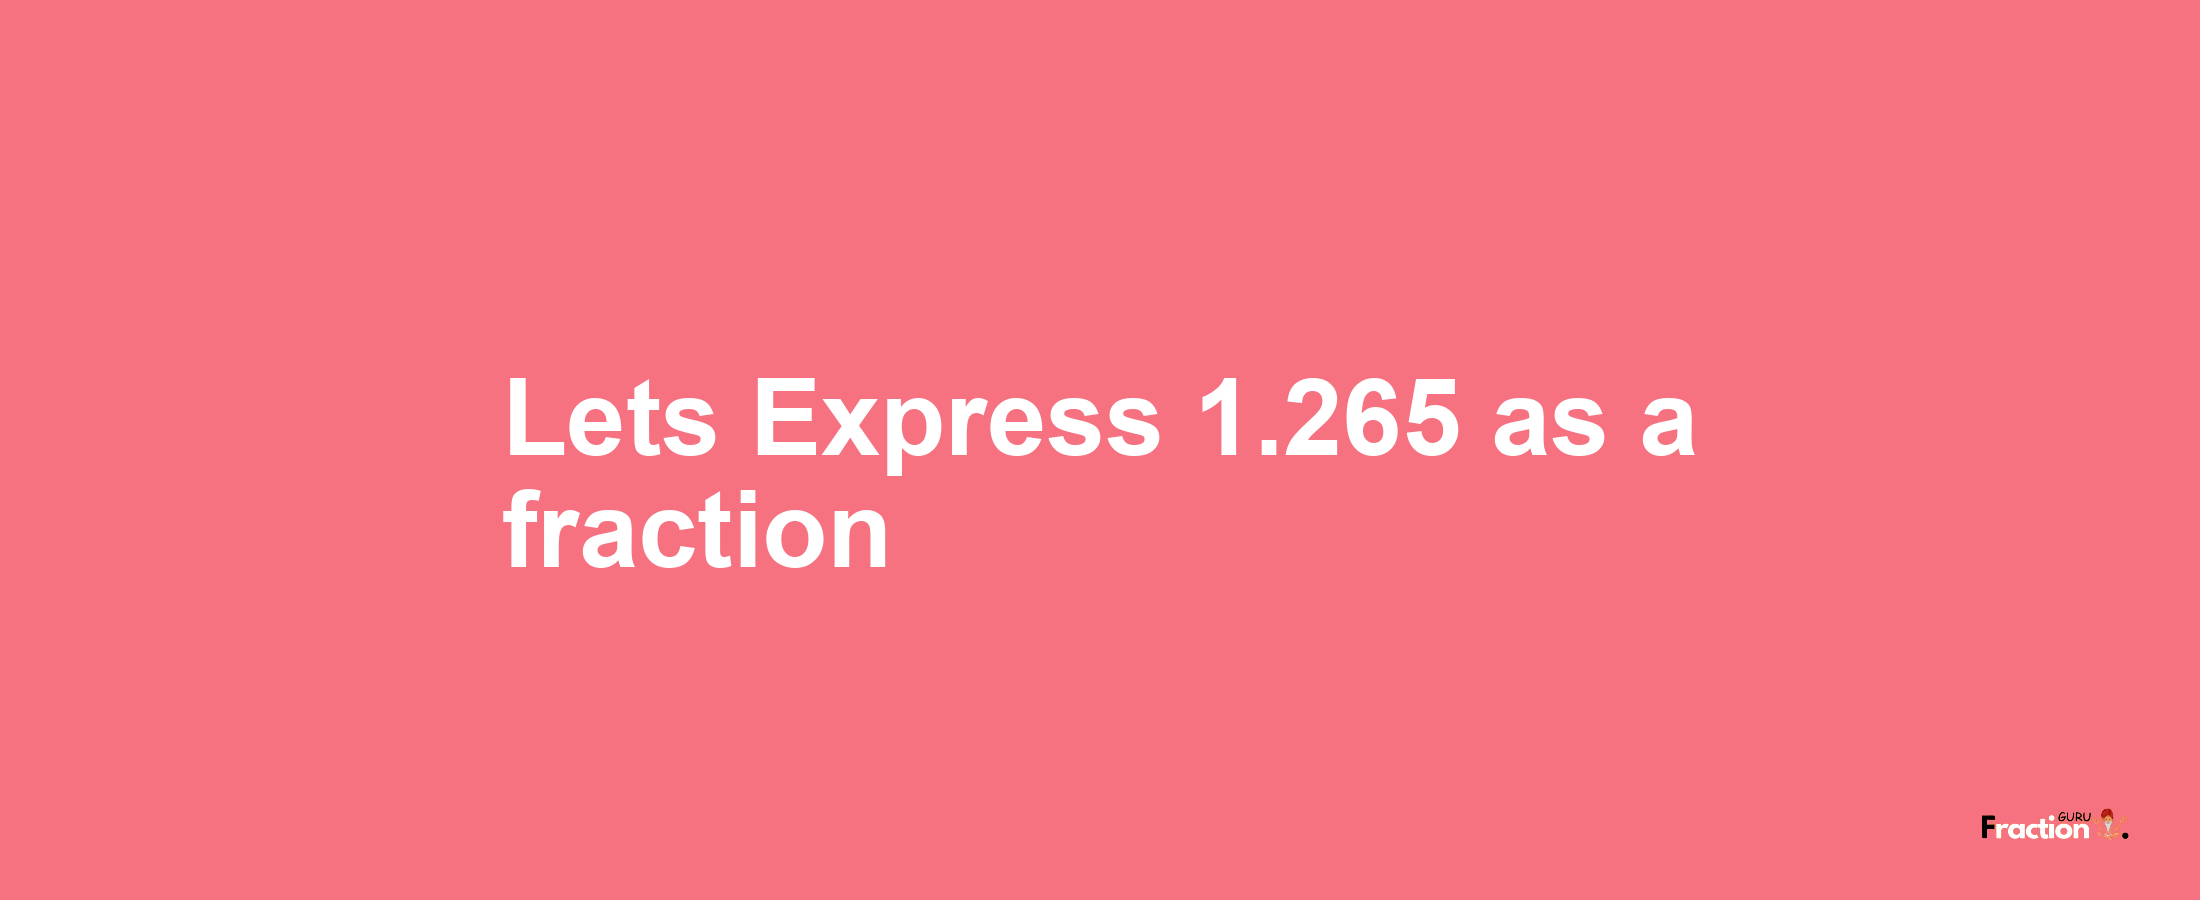 Lets Express 1.265 as afraction